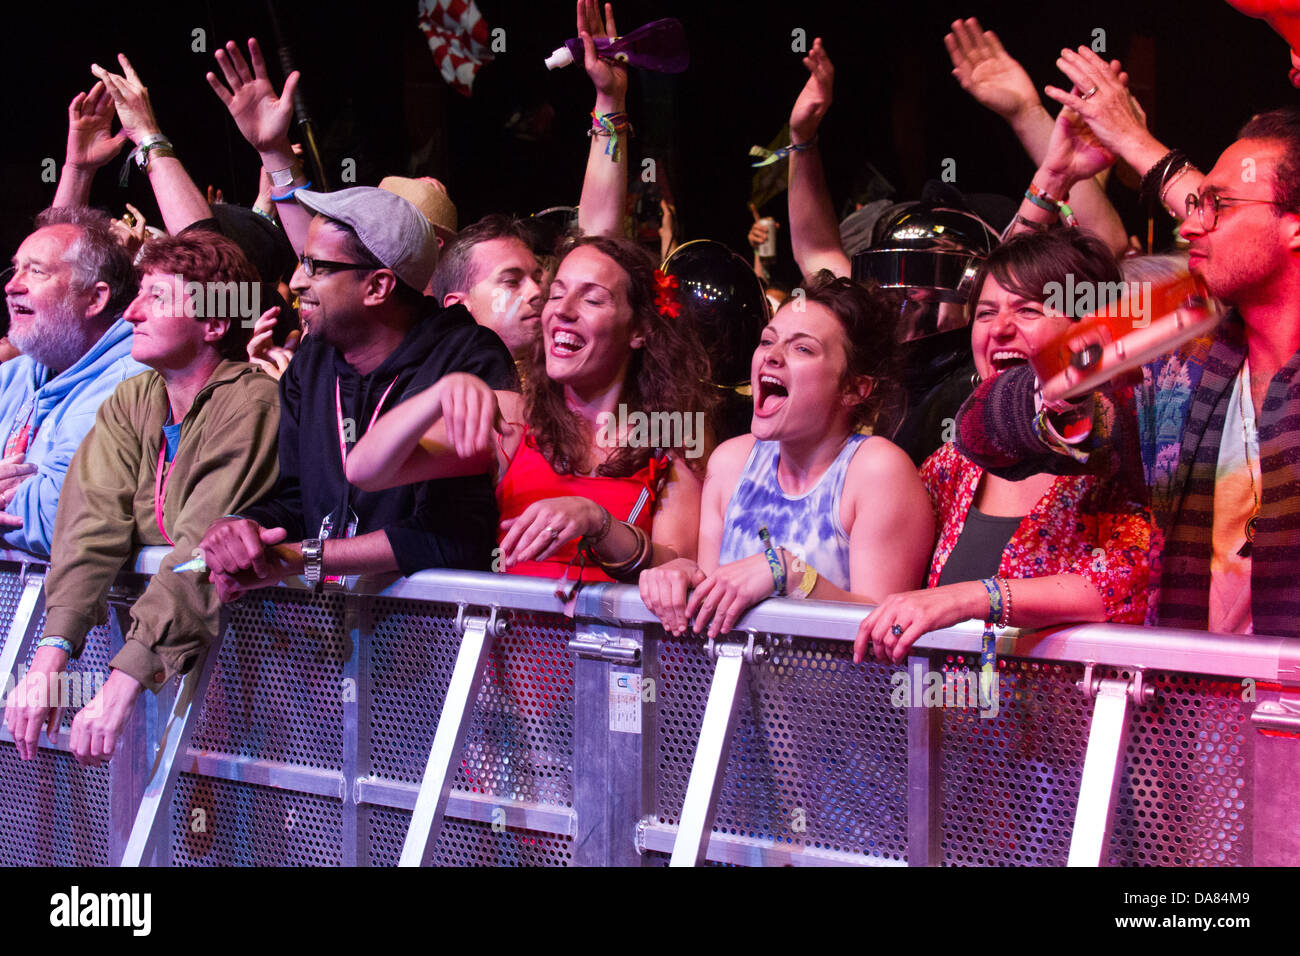 The Audience watching Chic Feat.Nile Rodgers performing at the Glastonbury Festival 2013, Somerset, United Kingdom. Stock Photo